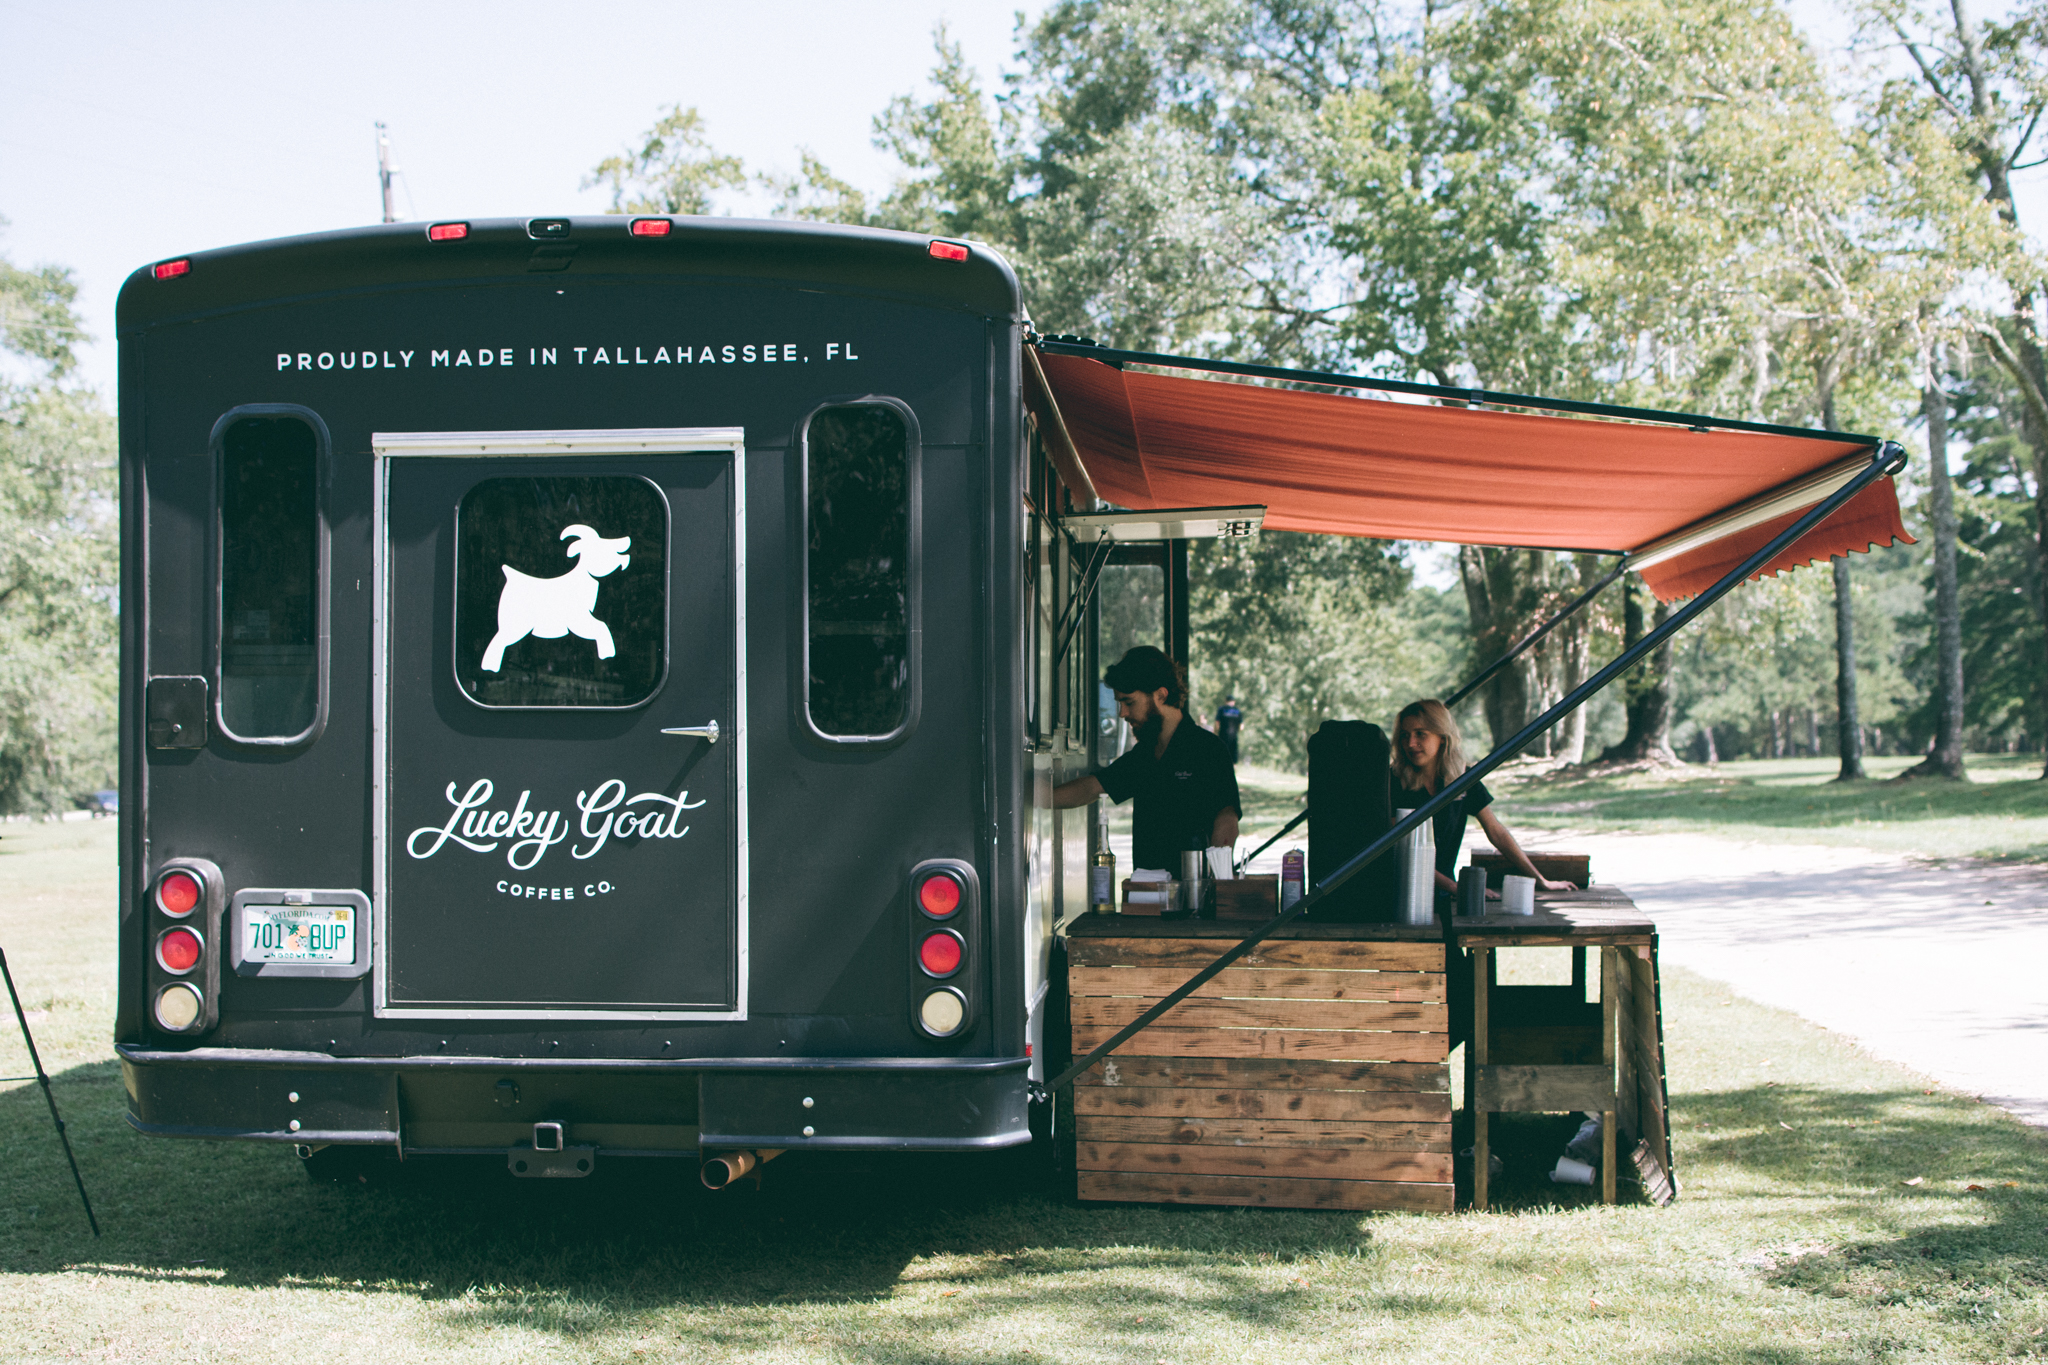 Lucky Goat serving coffee to Innovation Park of Tallahassee residents